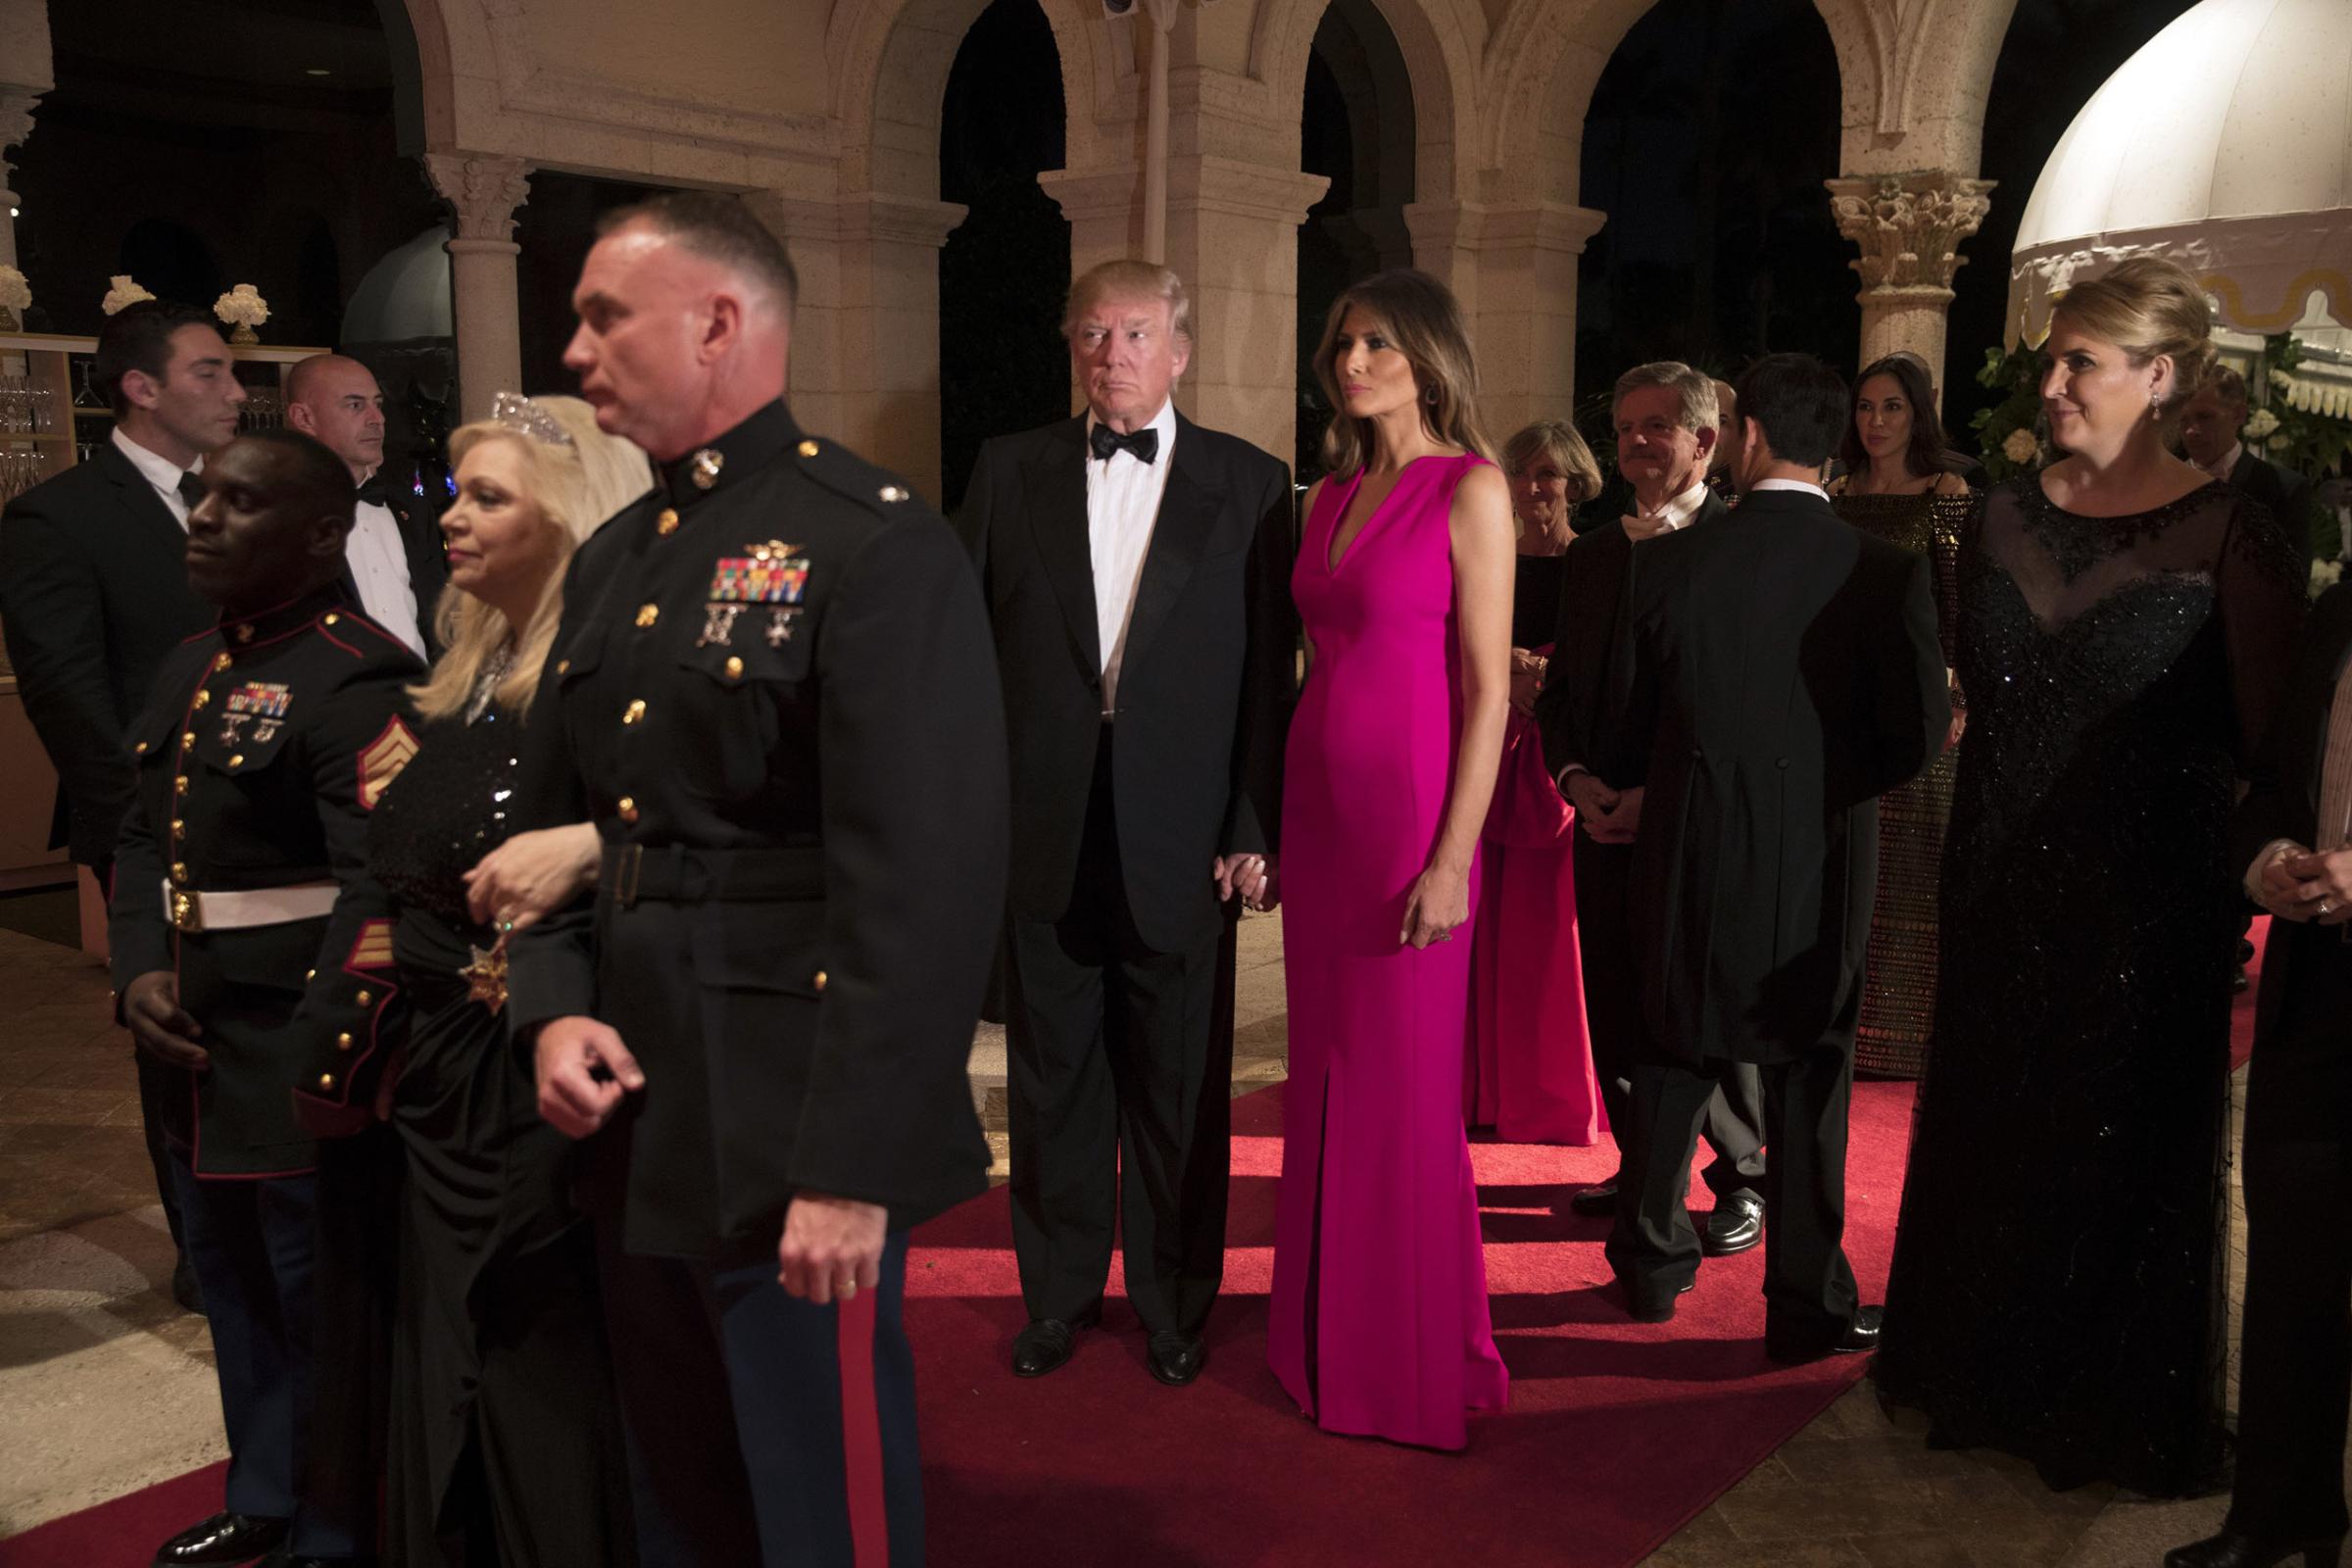 President Donald Trump and first lady Melania Trump arriving at the Red Cross Gala in the ballroom of Mar-a-lago, in Palm Beach, Sunday.